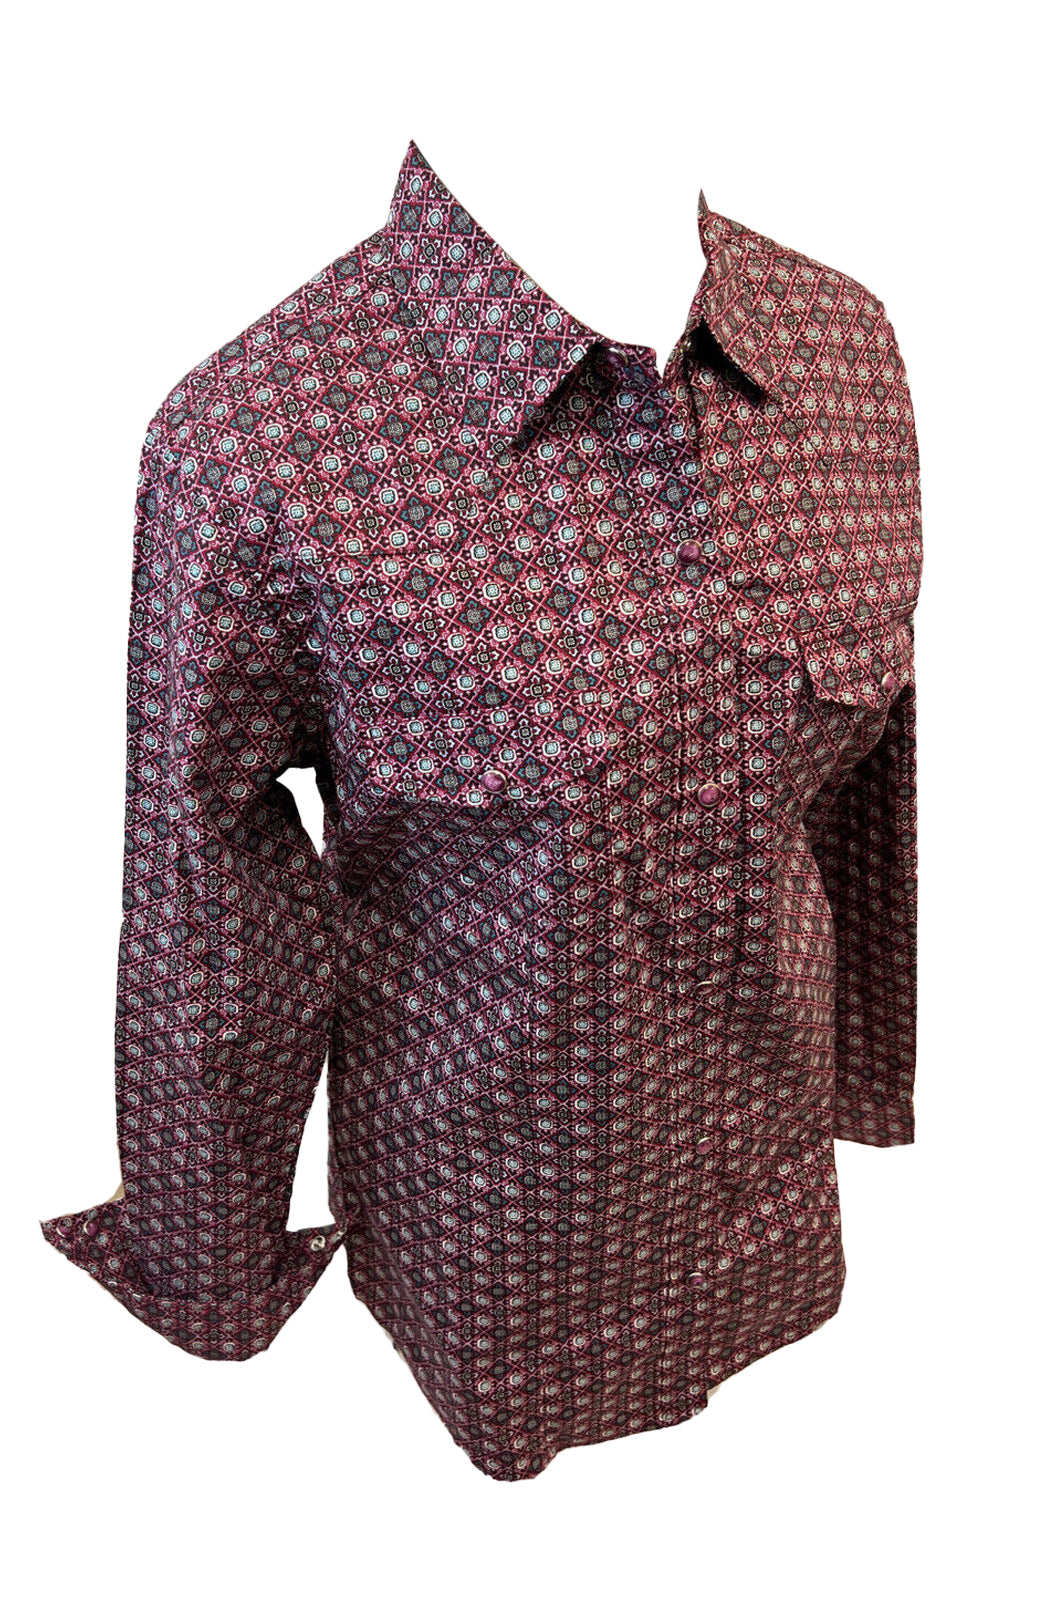 LADIES RODEO WESTERN SHIRTS: BURGUNDY RED GEOMETRIC SHAPES